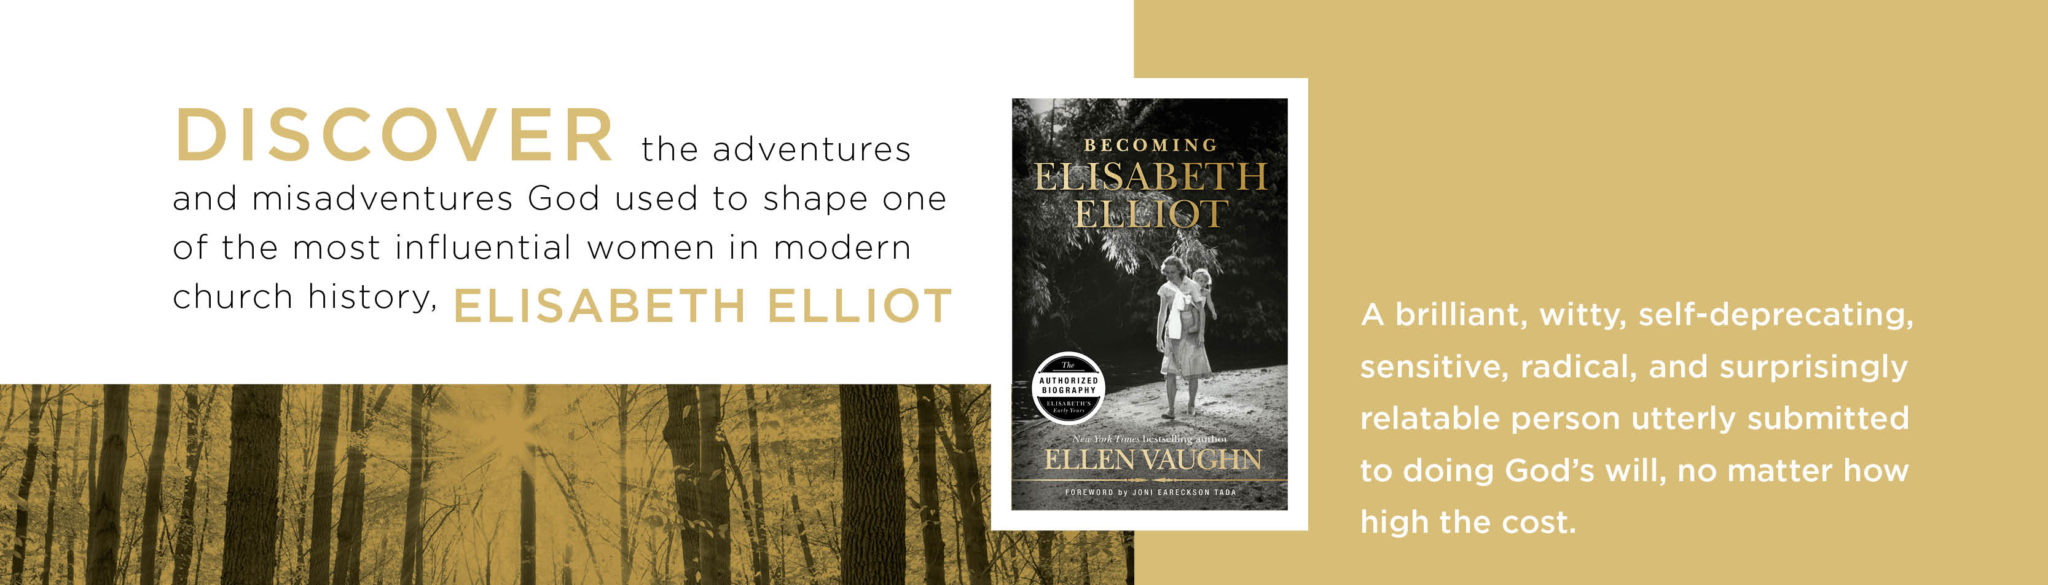 Discover the adventures and misadventures God used to shape one of the most influential women in modern church history, Elisabeth Elliot. A brilliant, witty, self-deprecating, sensitive, radical, and surprisingly relatable person utterly submitted to doing God's will, no matter how high the cost.